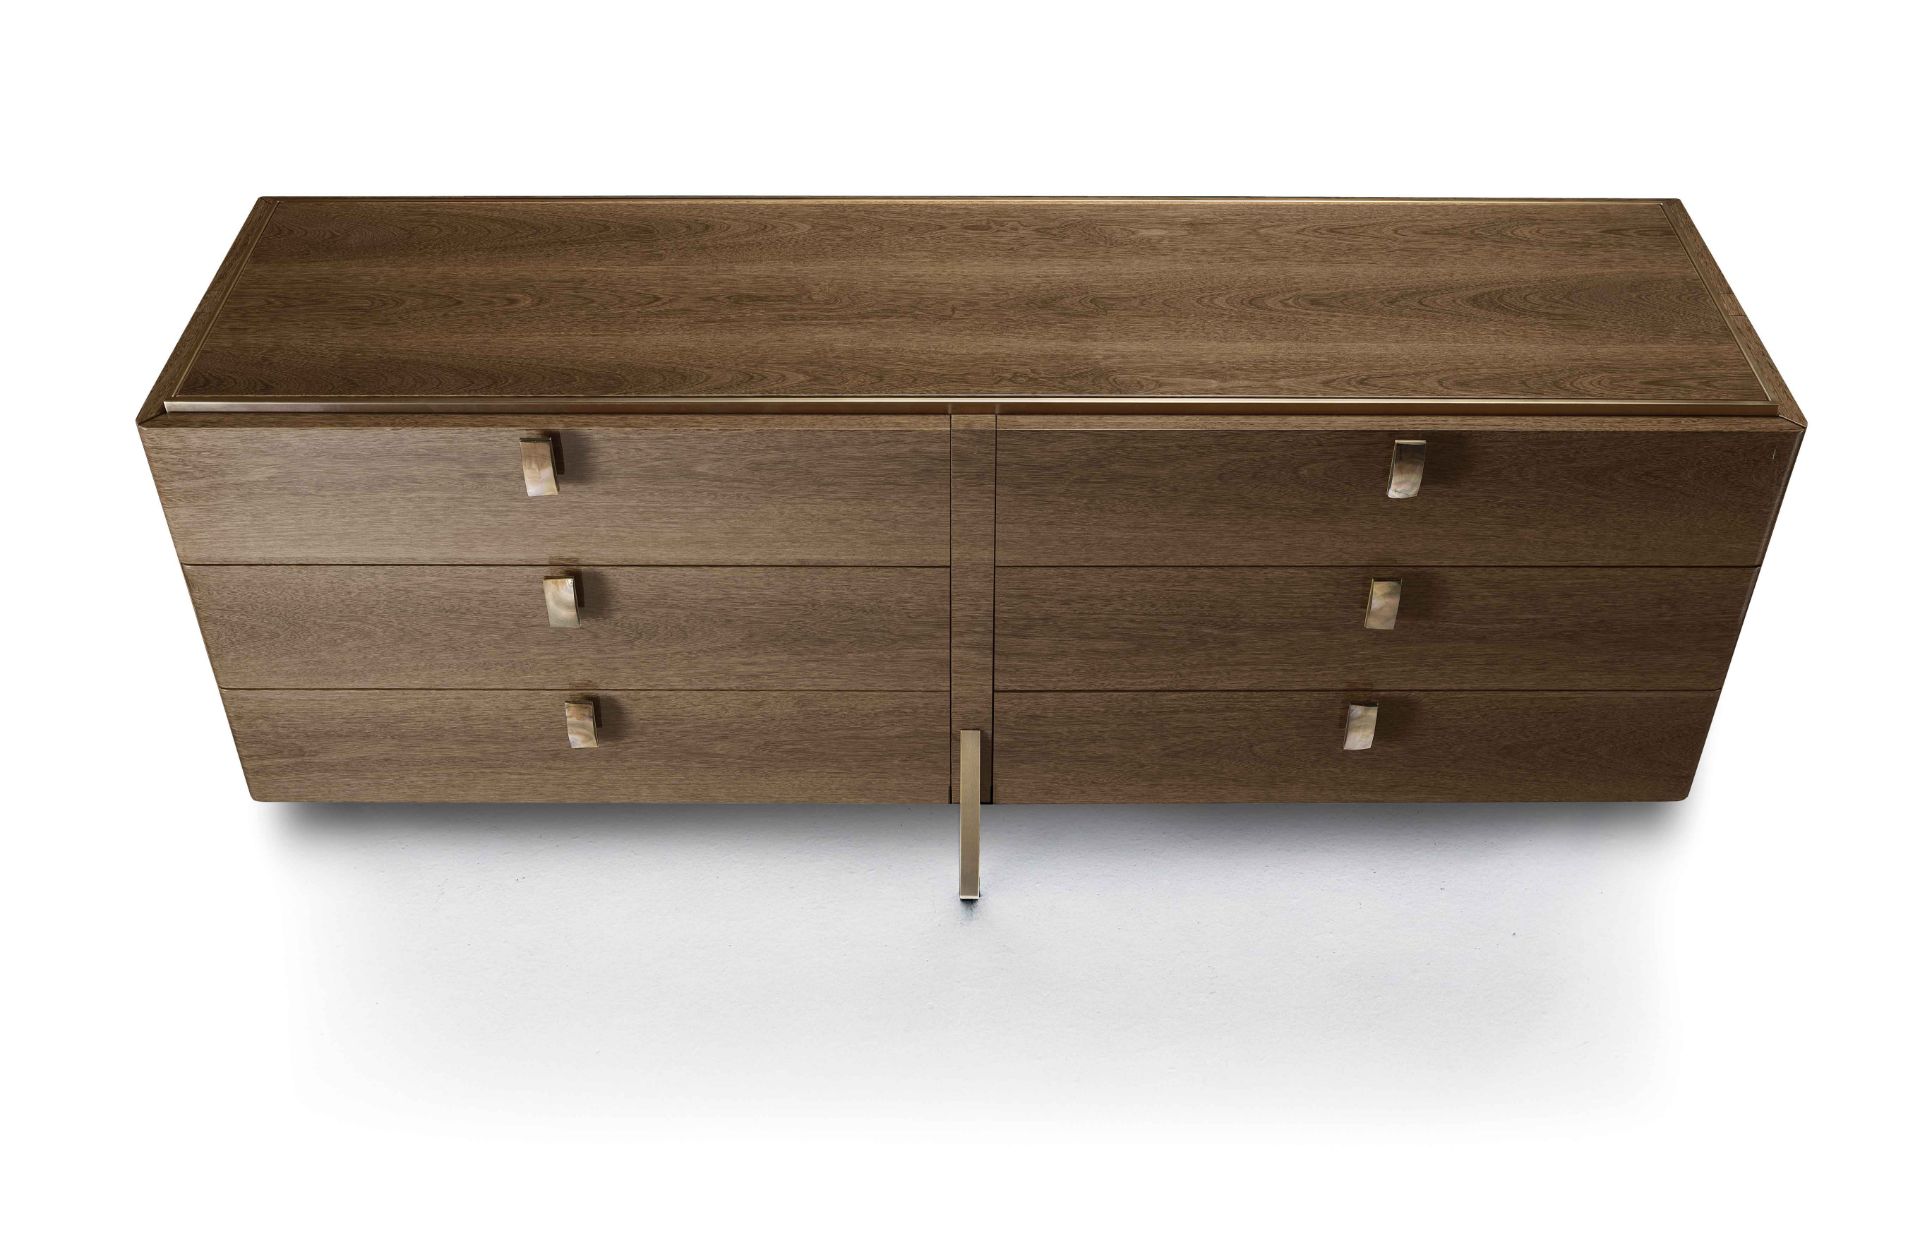 Fashion Affair Bedroom Cabinet by Telemaco for Malerba The Dresser has six drawers, is decorated - Bild 2 aus 15